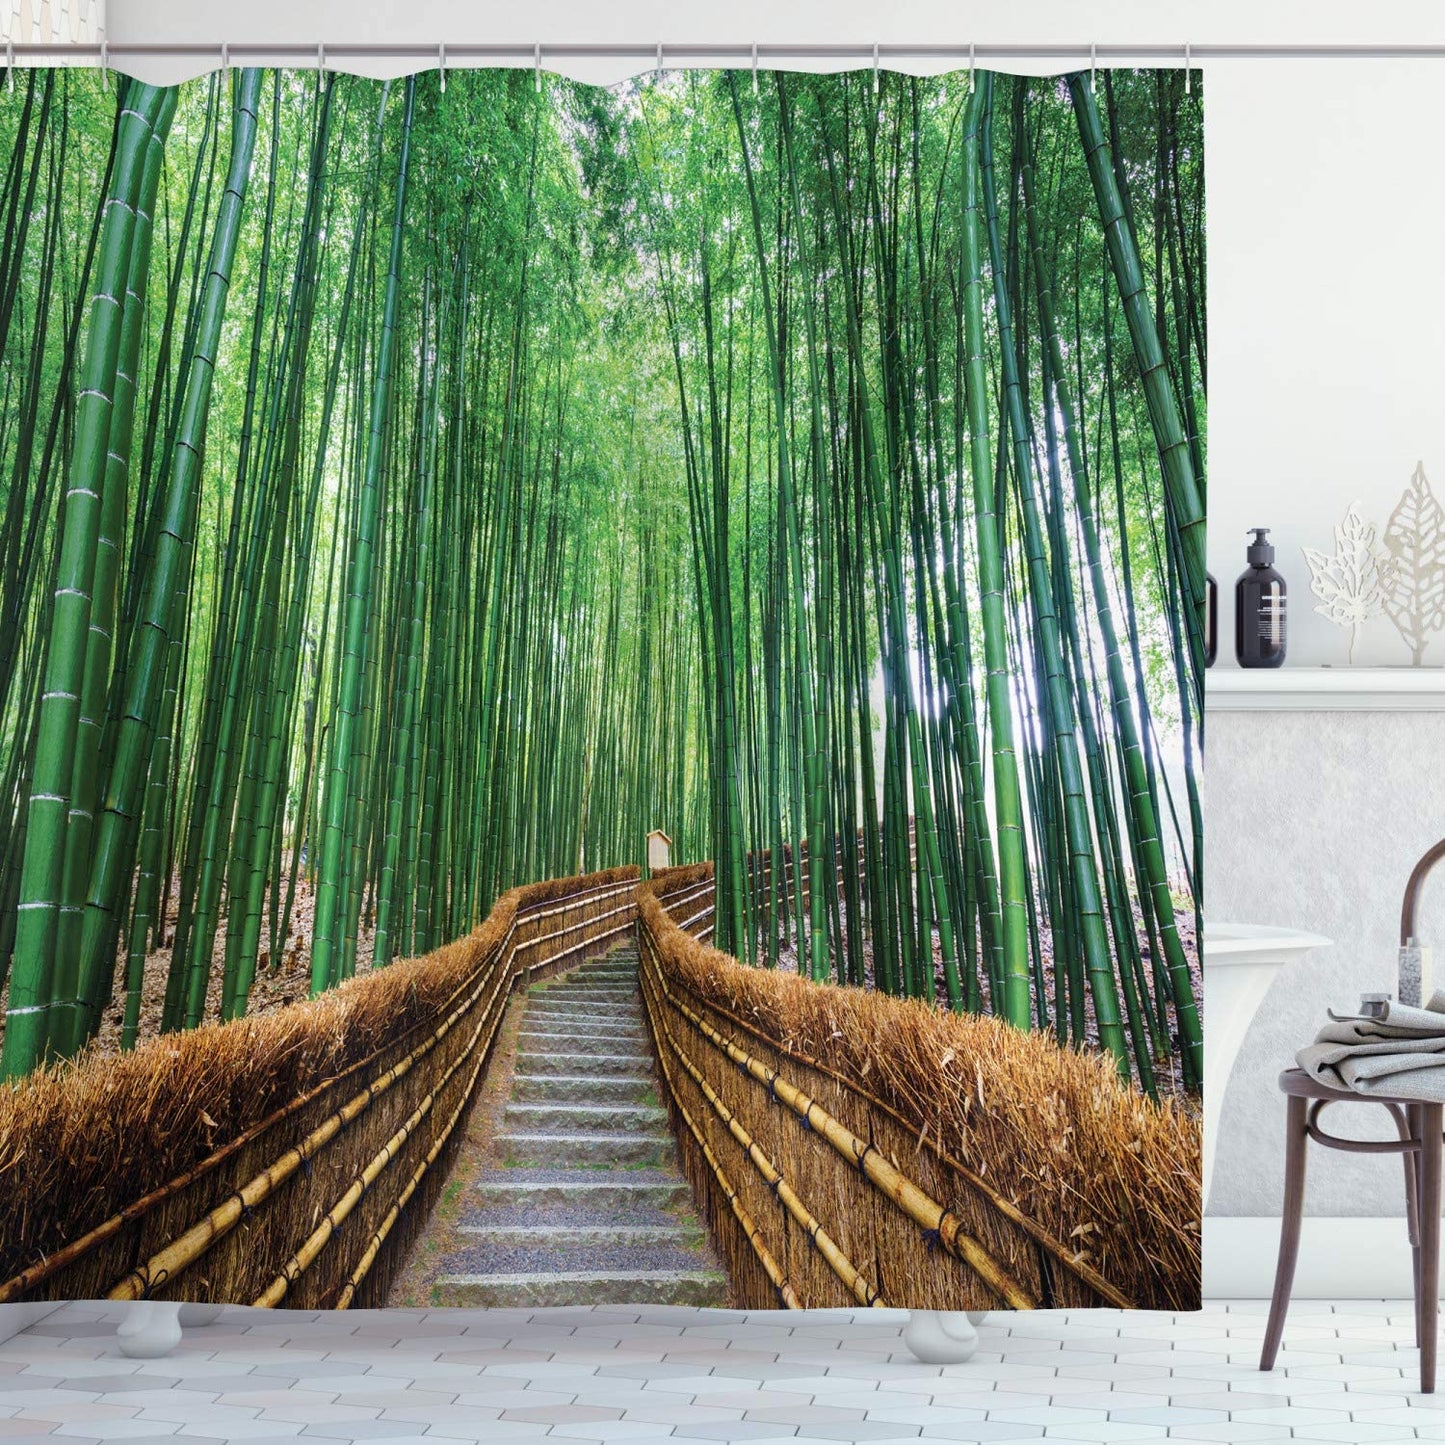 Bridge Over Tree Landscape Bamboo Forest Shower Curtain